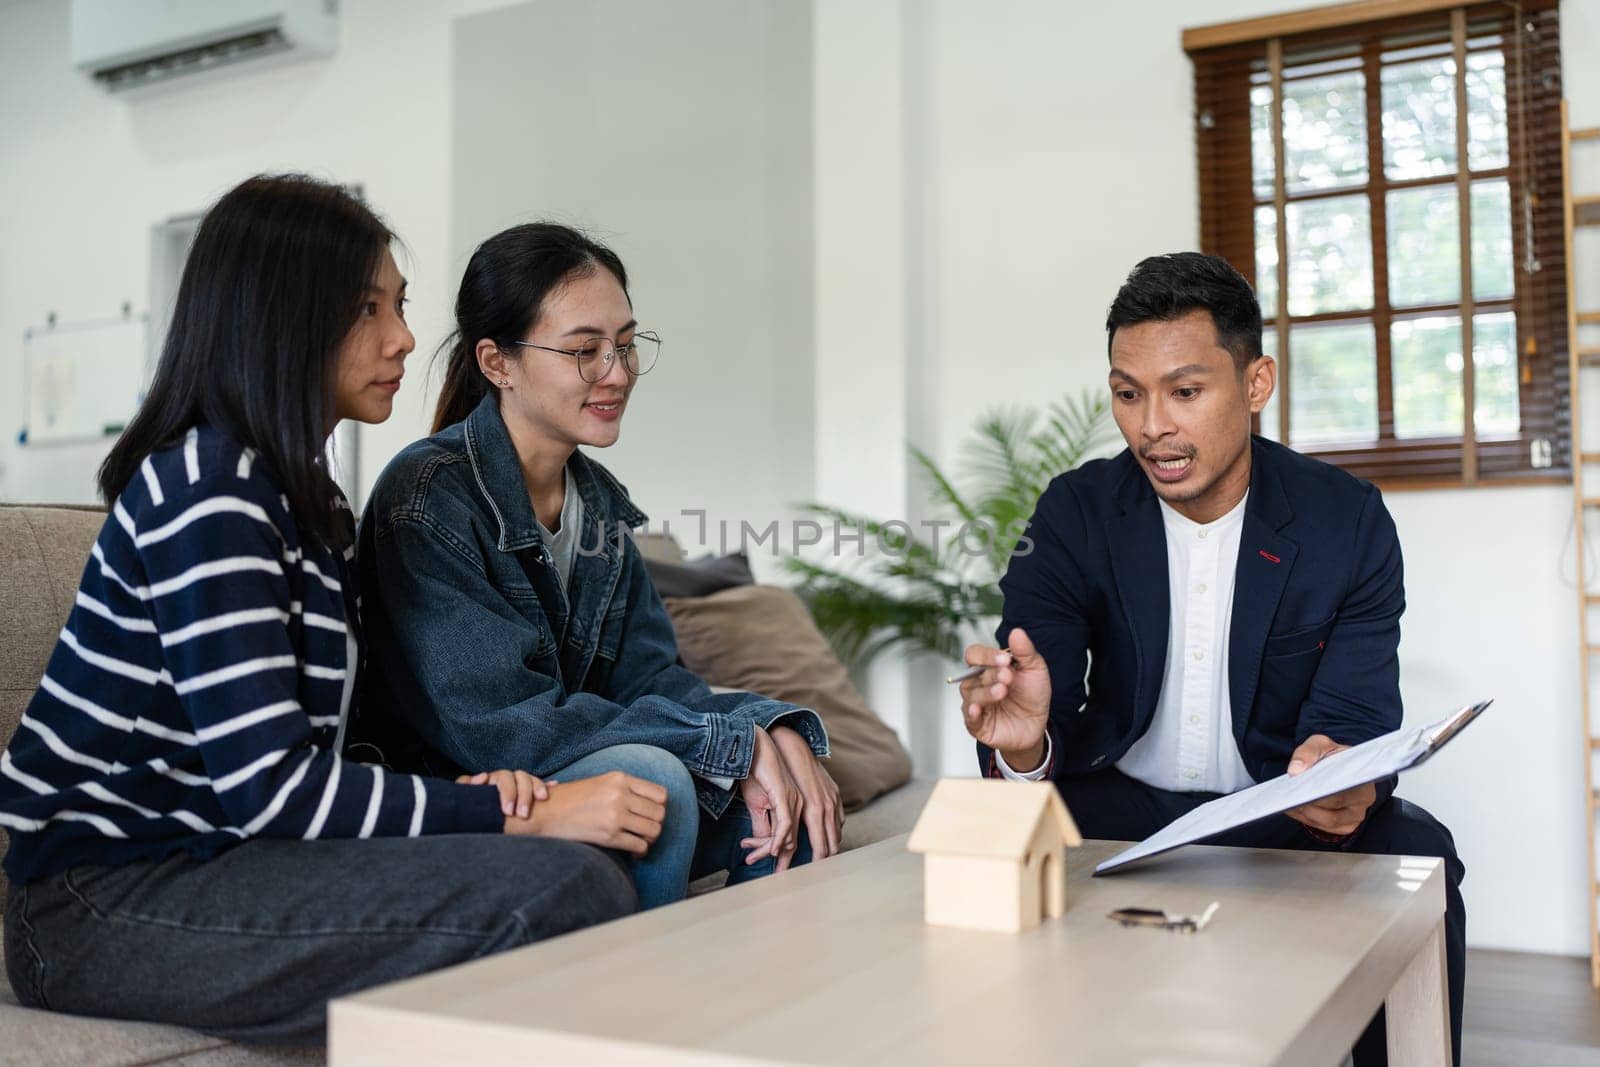 young lesbian married couple discussing agreement with skilled real estate agent or broker. Professional financial advisor or saleswoman explaining contract detail.